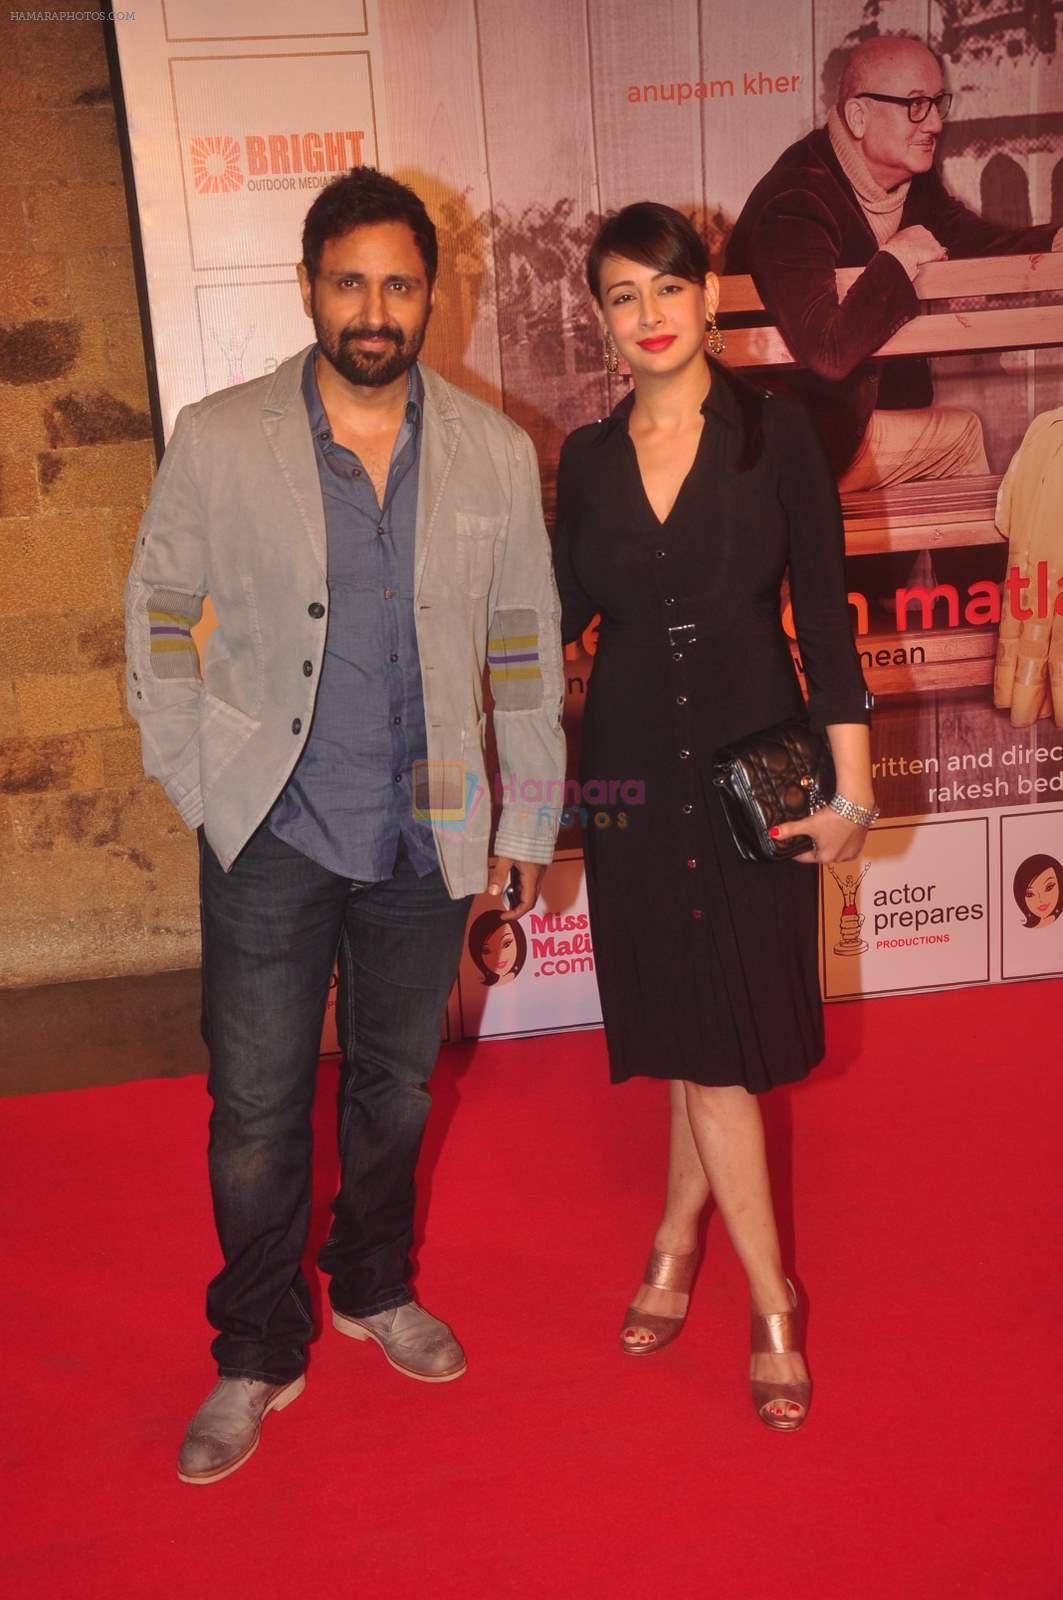 Preeti Jhangiani at Anupam and Neena Gupta's play premiere in NCPA on 8th March 2015